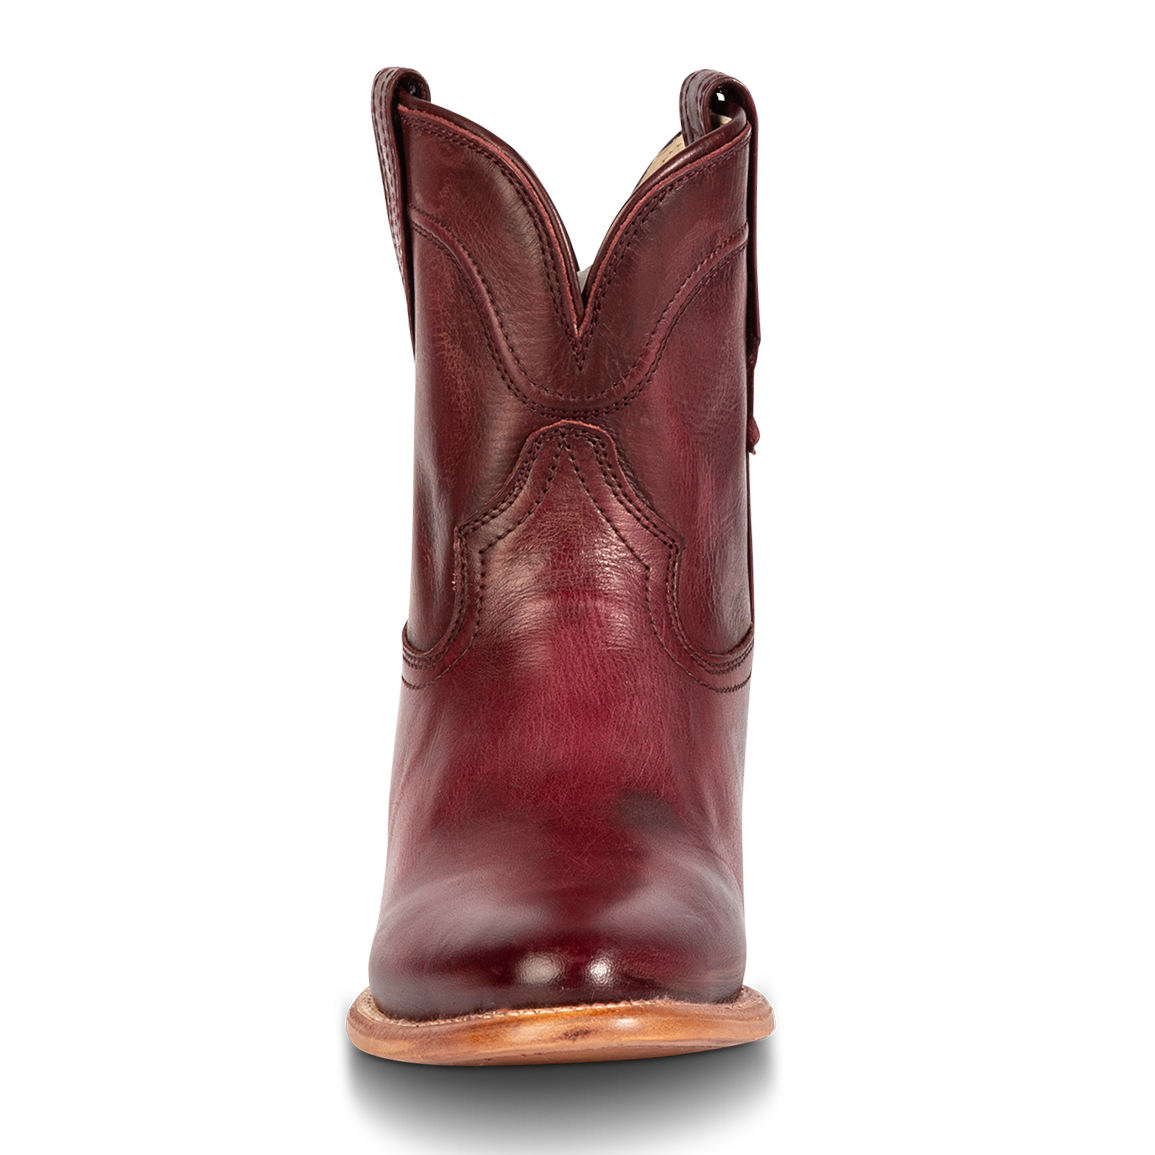 Front view showing scallop detailing FREEBIRD women's Zamora wine leather bootie